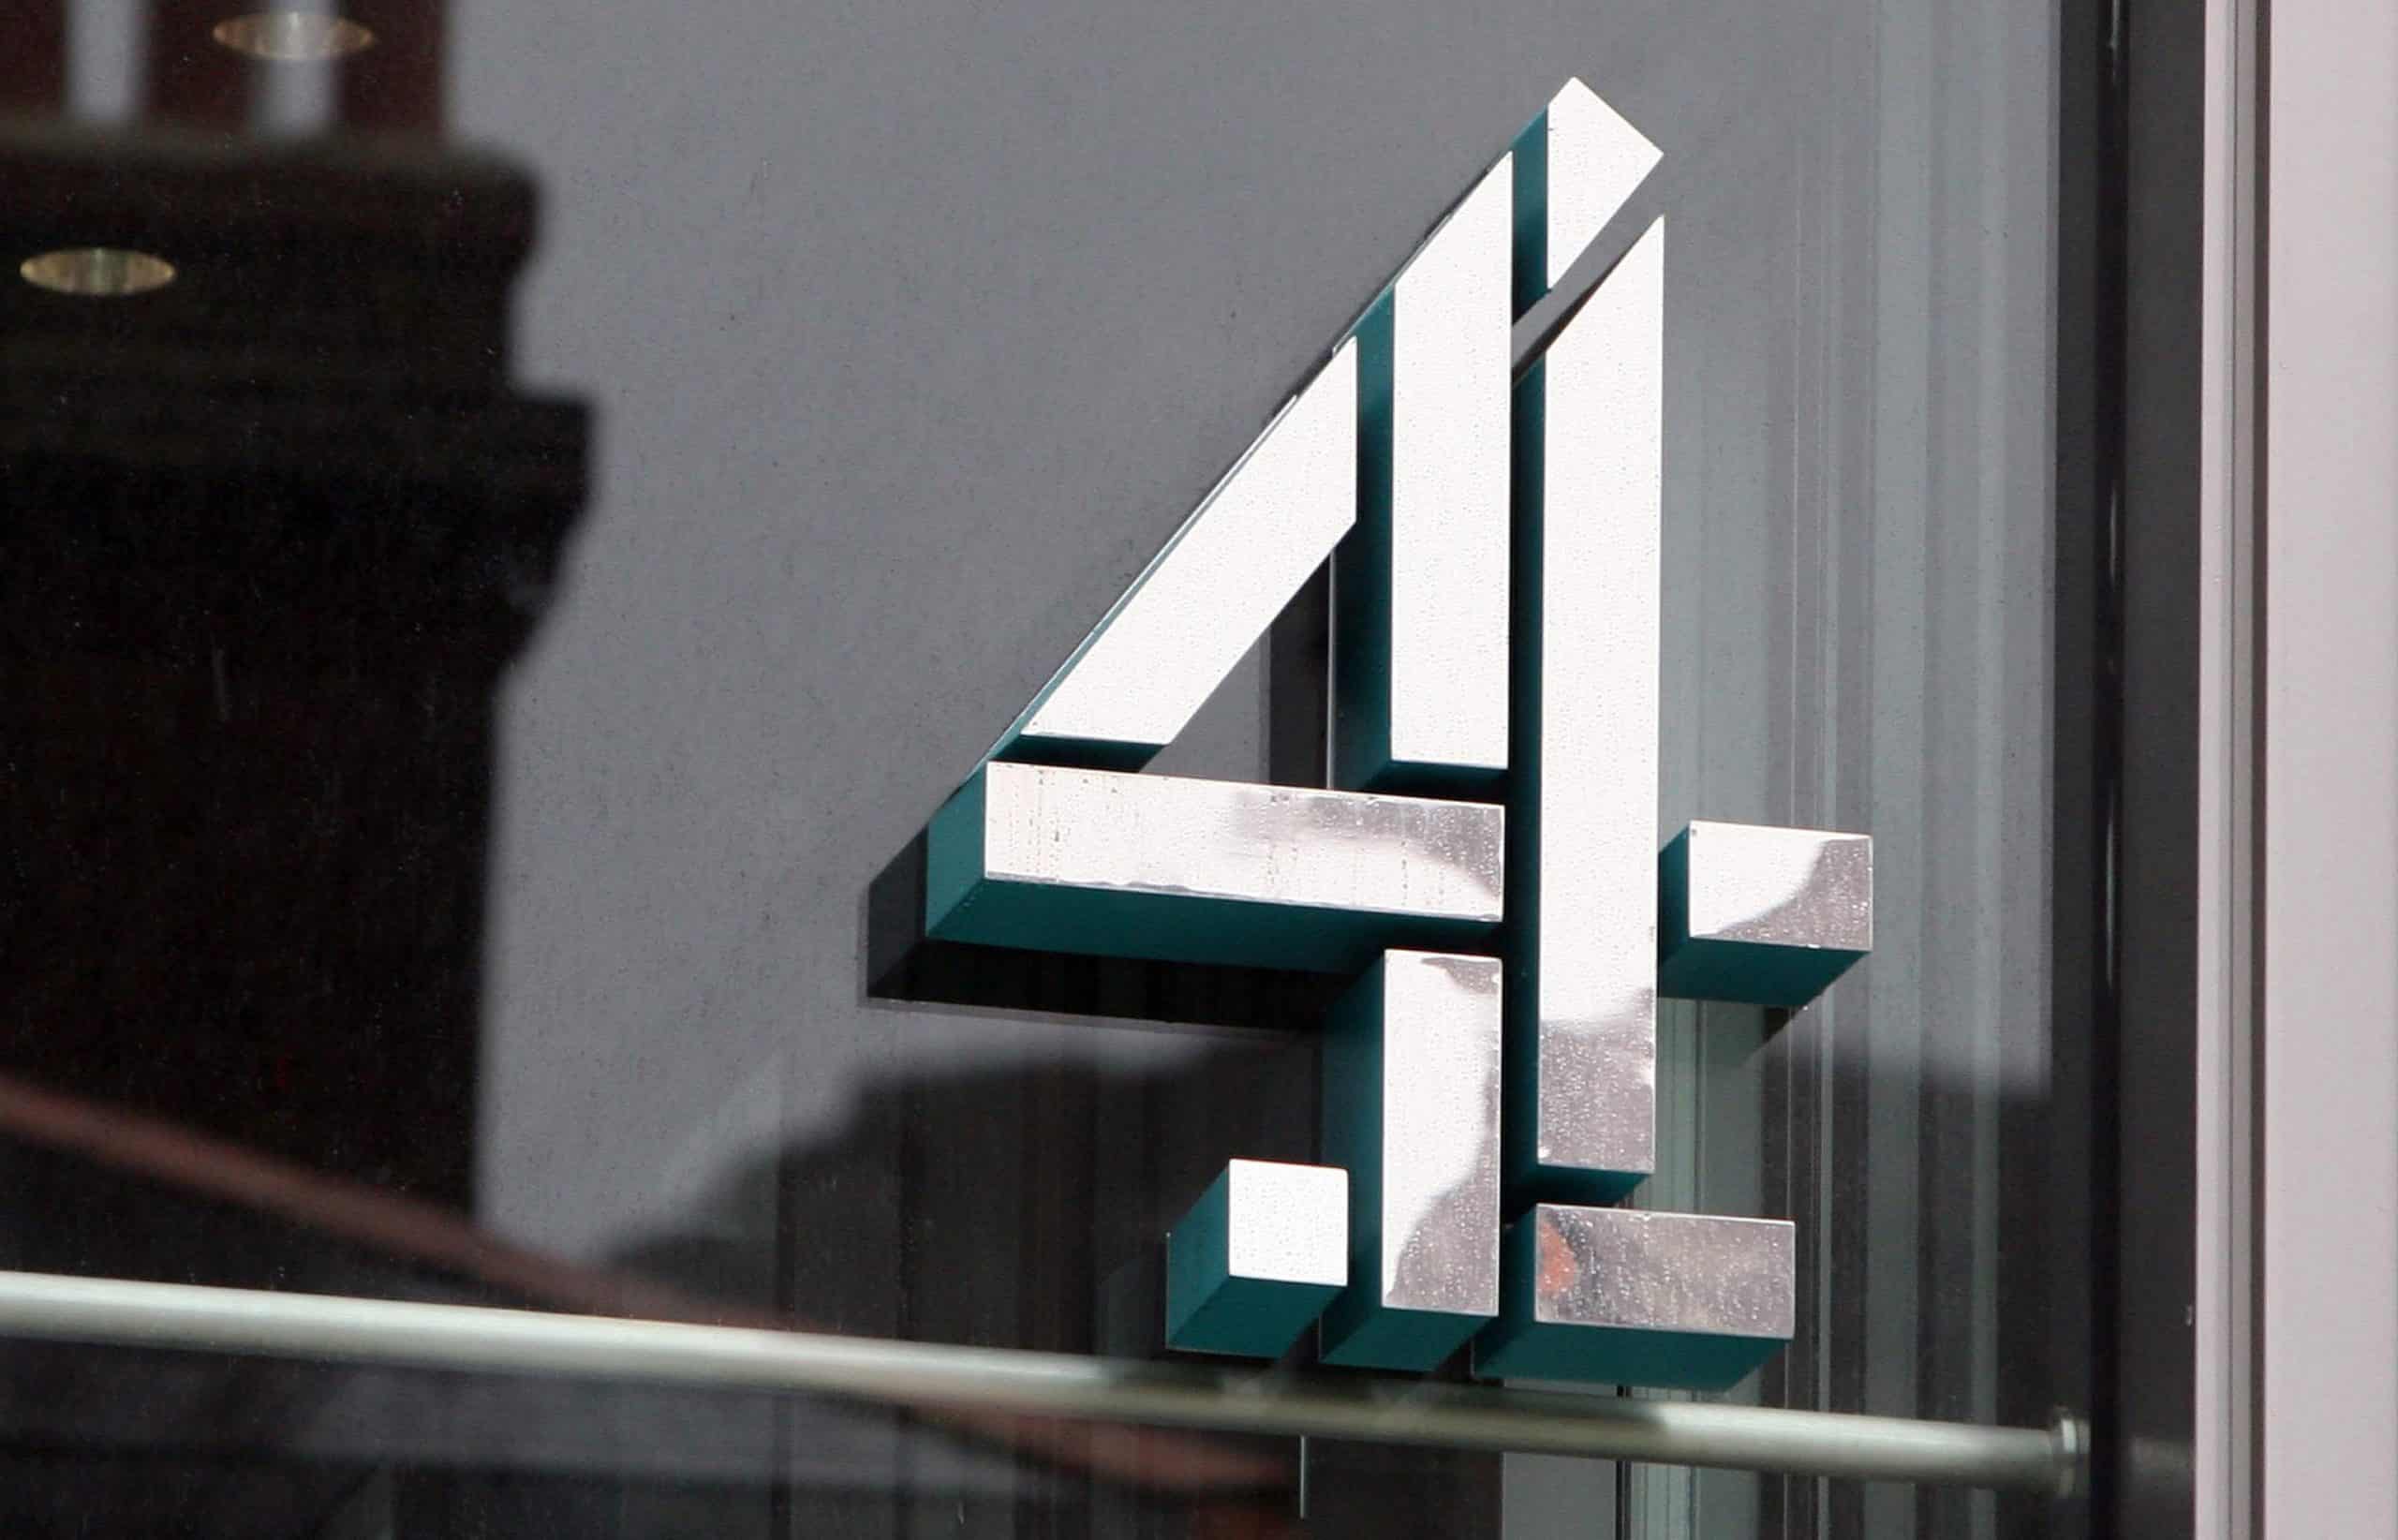 Reaction as government proceeds with plans to privatise Channel 4